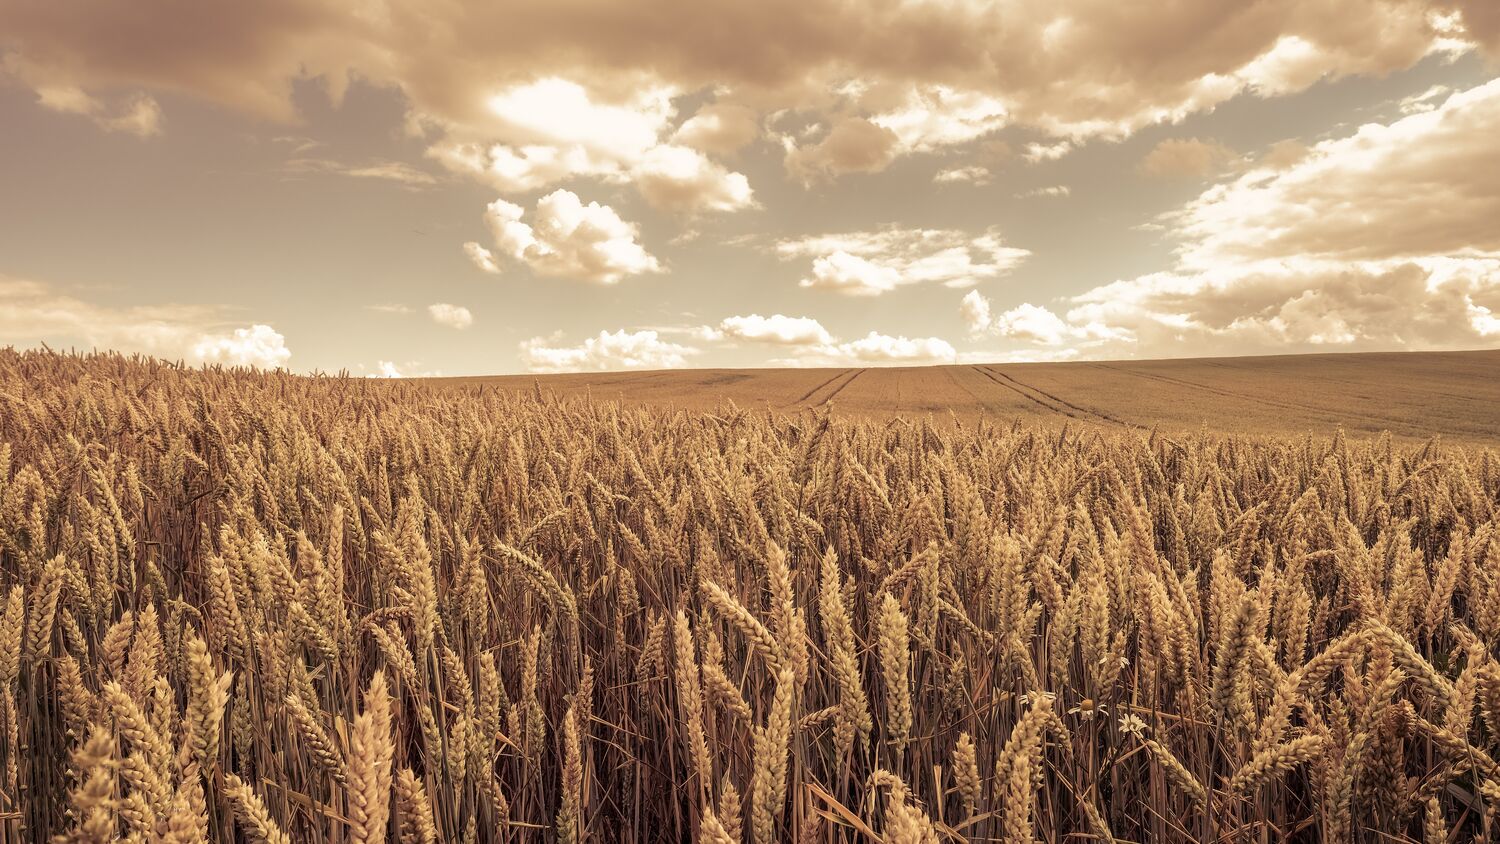 The Backrooms Files: Level 10 - Field of Wheat 